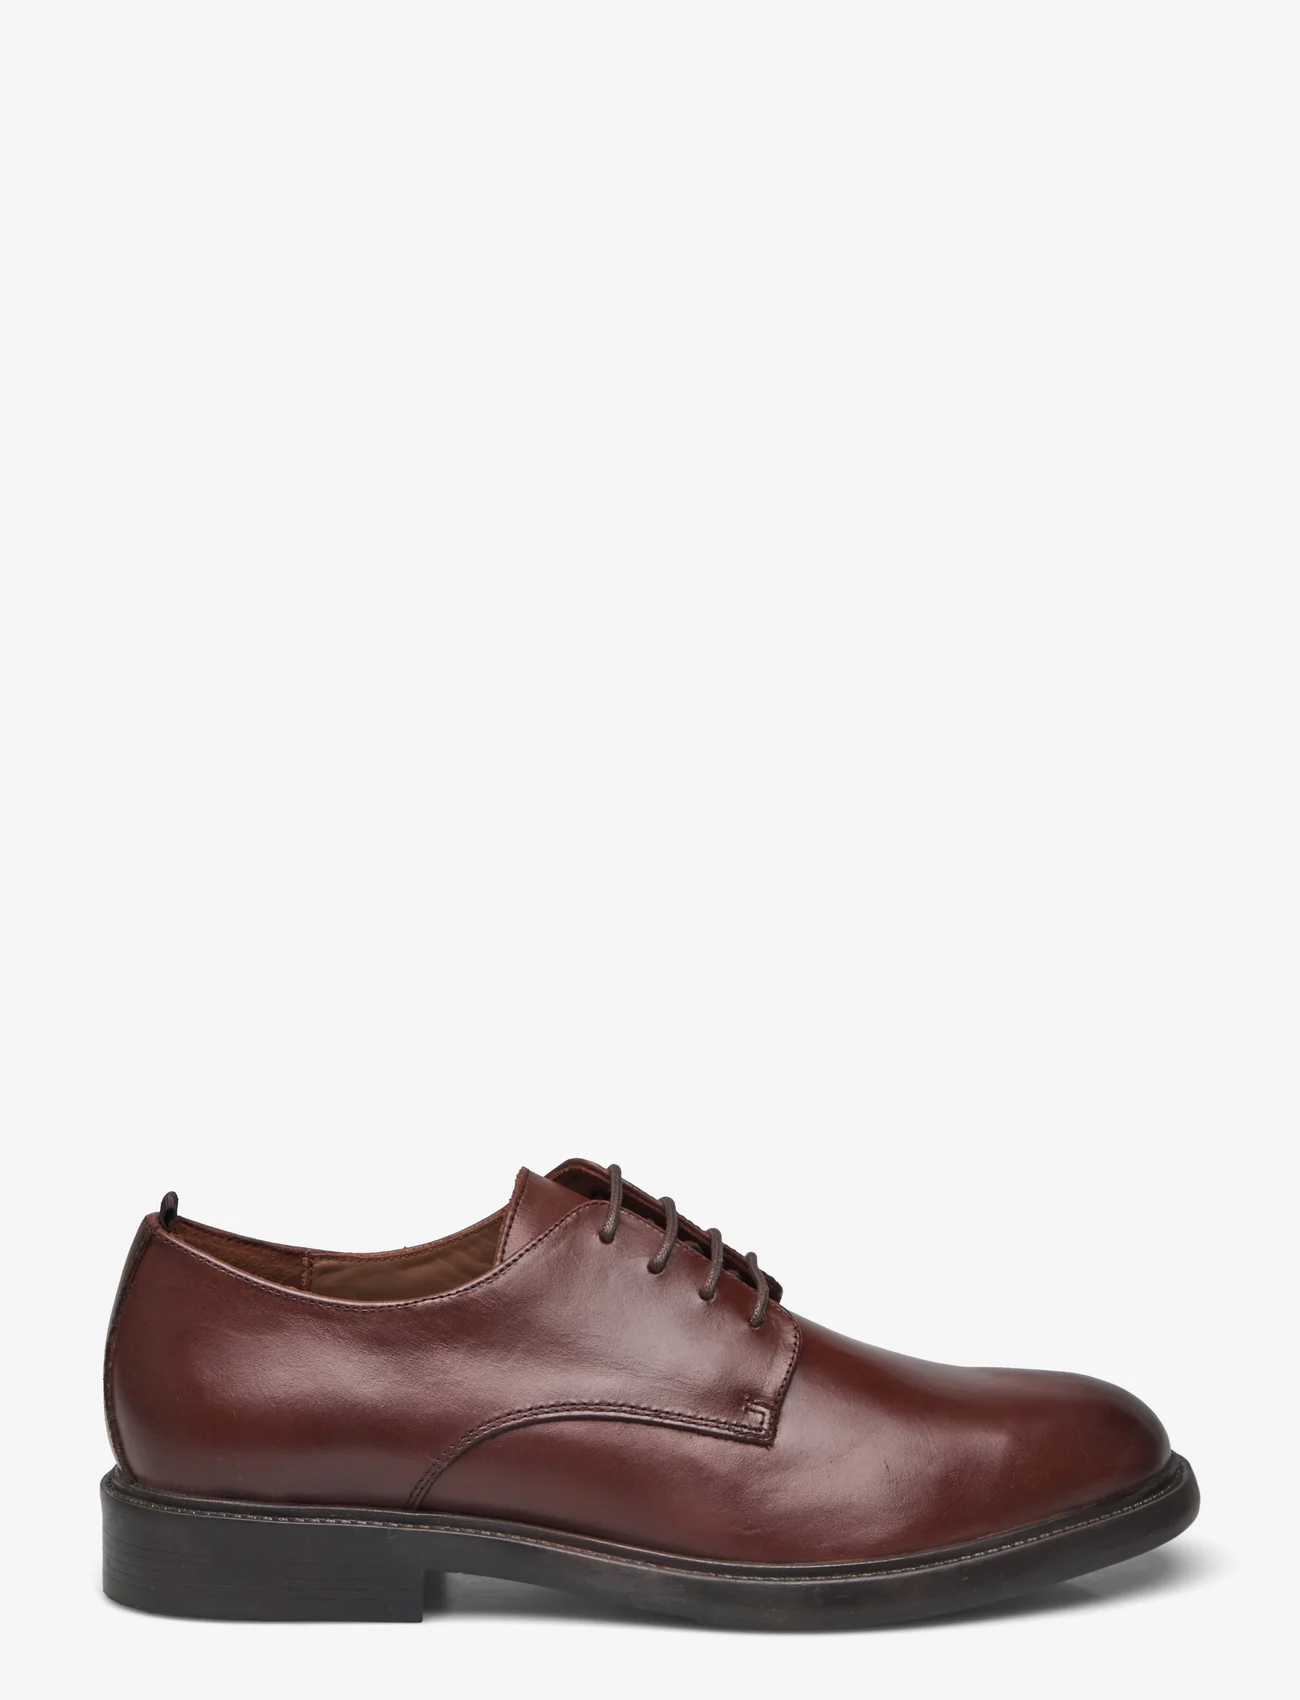 Marstrand - ADRIAN MARSTRAND - laced shoes - brown - 1